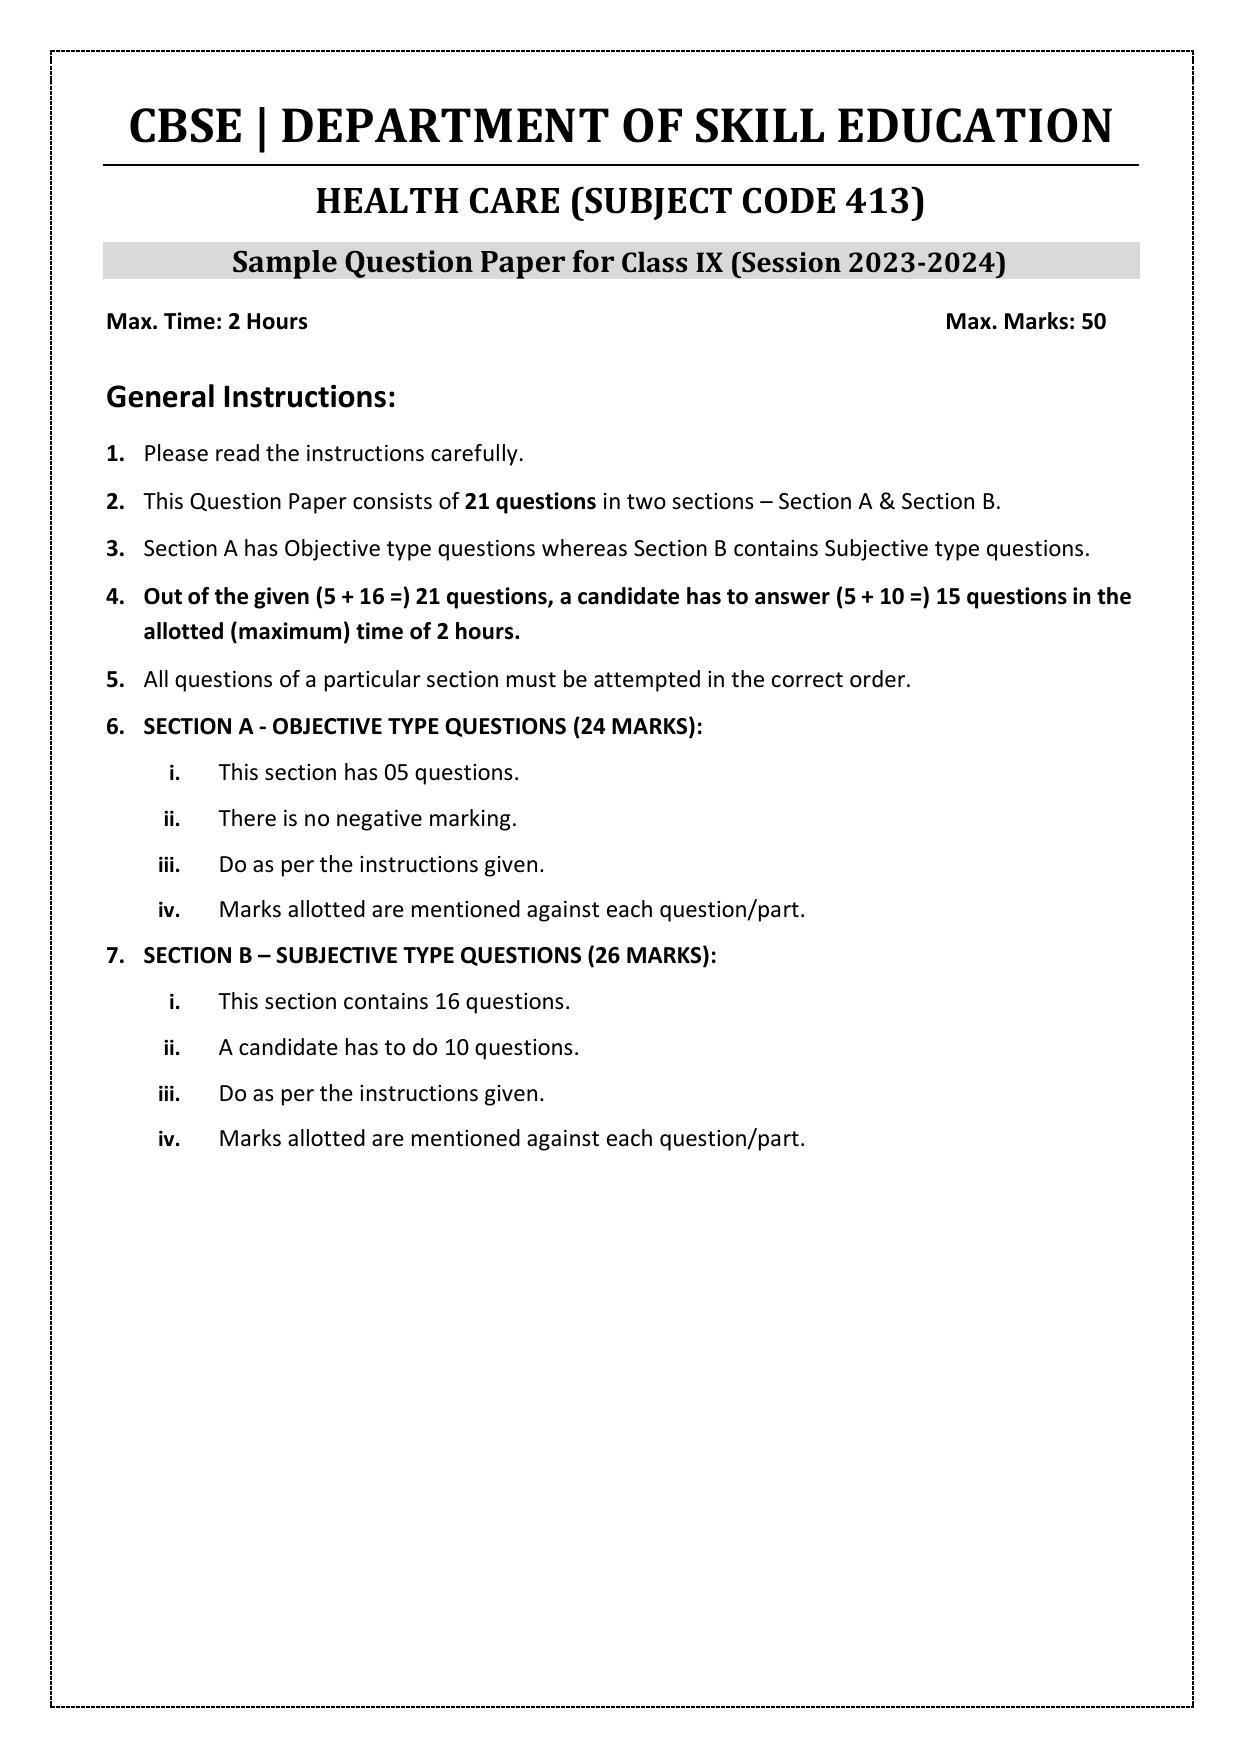 CBSE Class 9 Health Care Skill Education-Sample Paper 2024 - Page 2